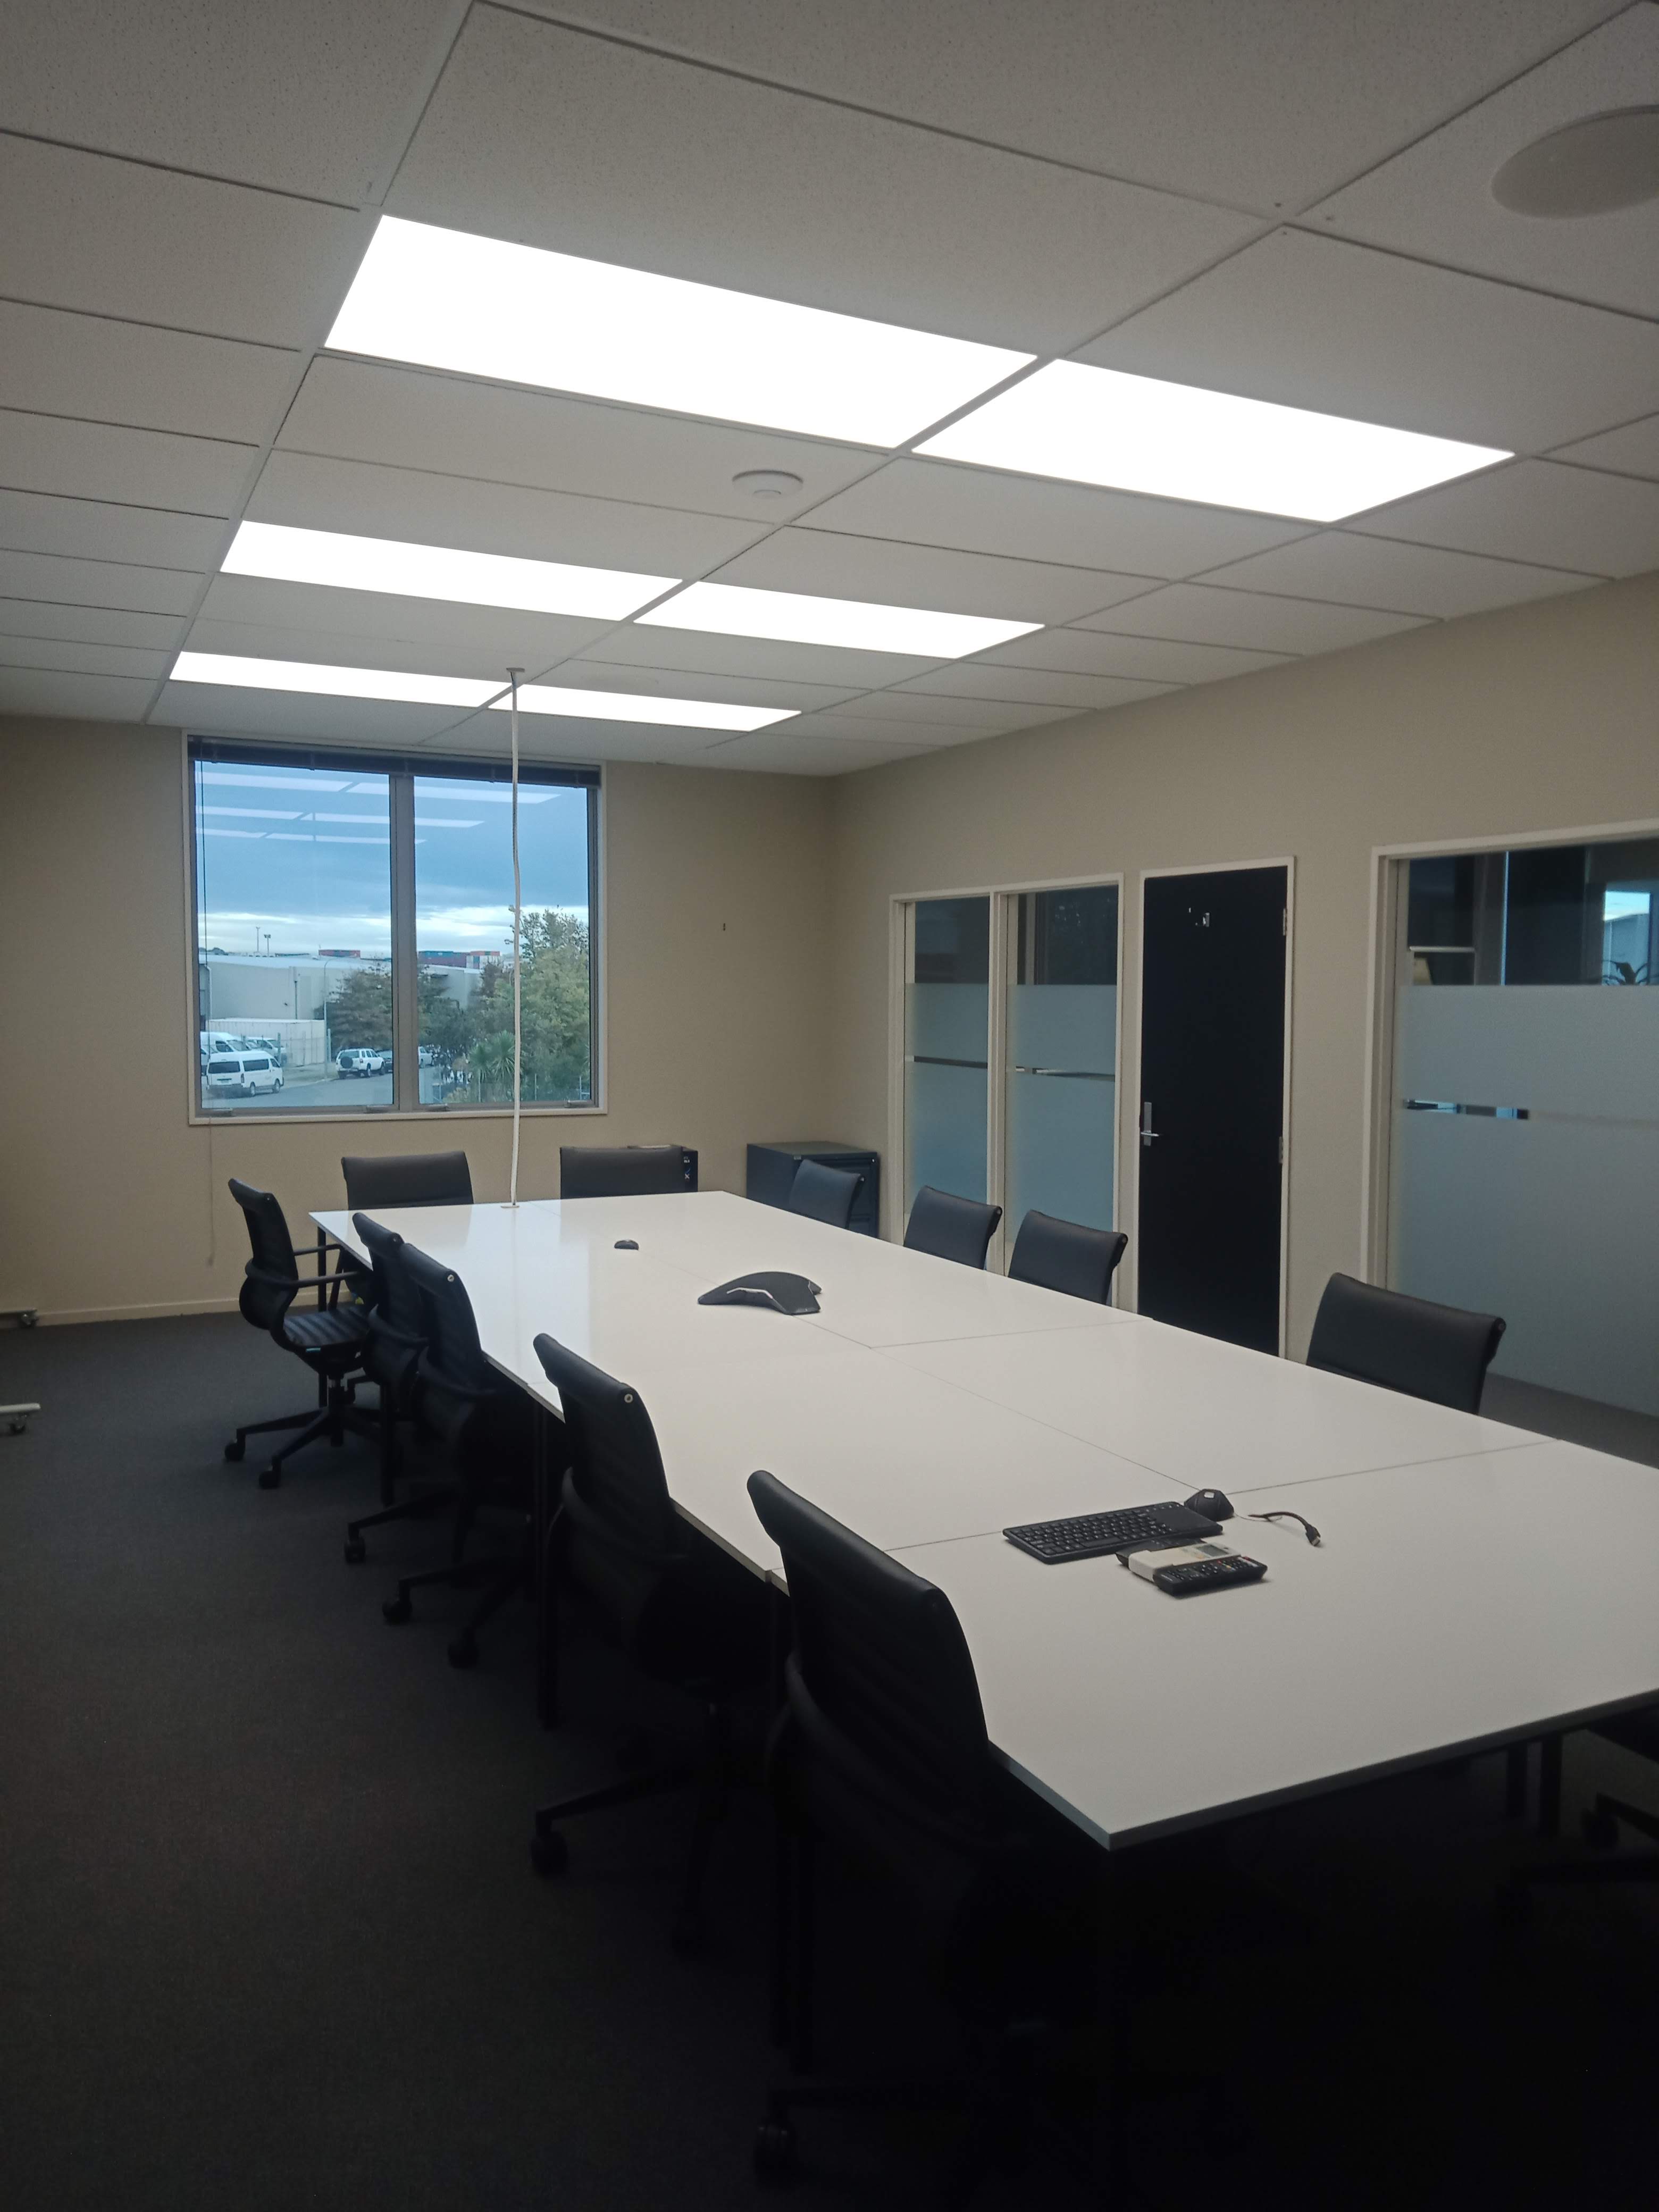 Computer Dynamics requested a lighting solution for their Christchurch office.